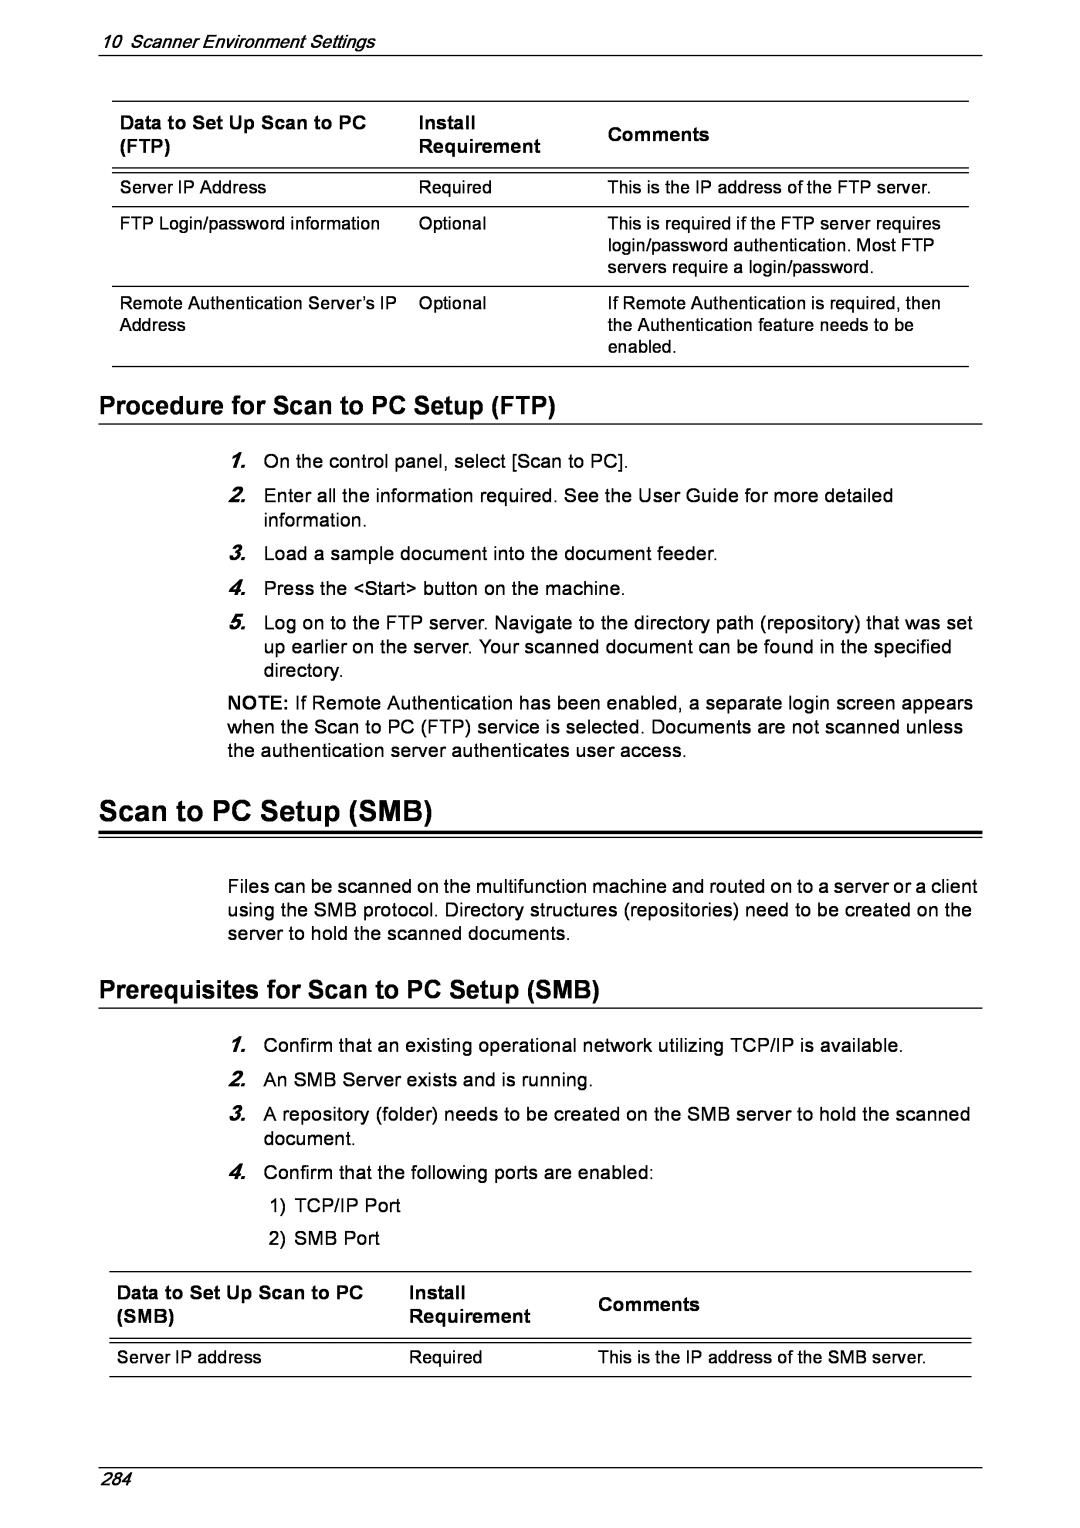 Xerox 5222 manual Procedure for Scan to PC Setup FTP, Prerequisites for Scan to PC Setup SMB, Data to Set Up Scan to PC 